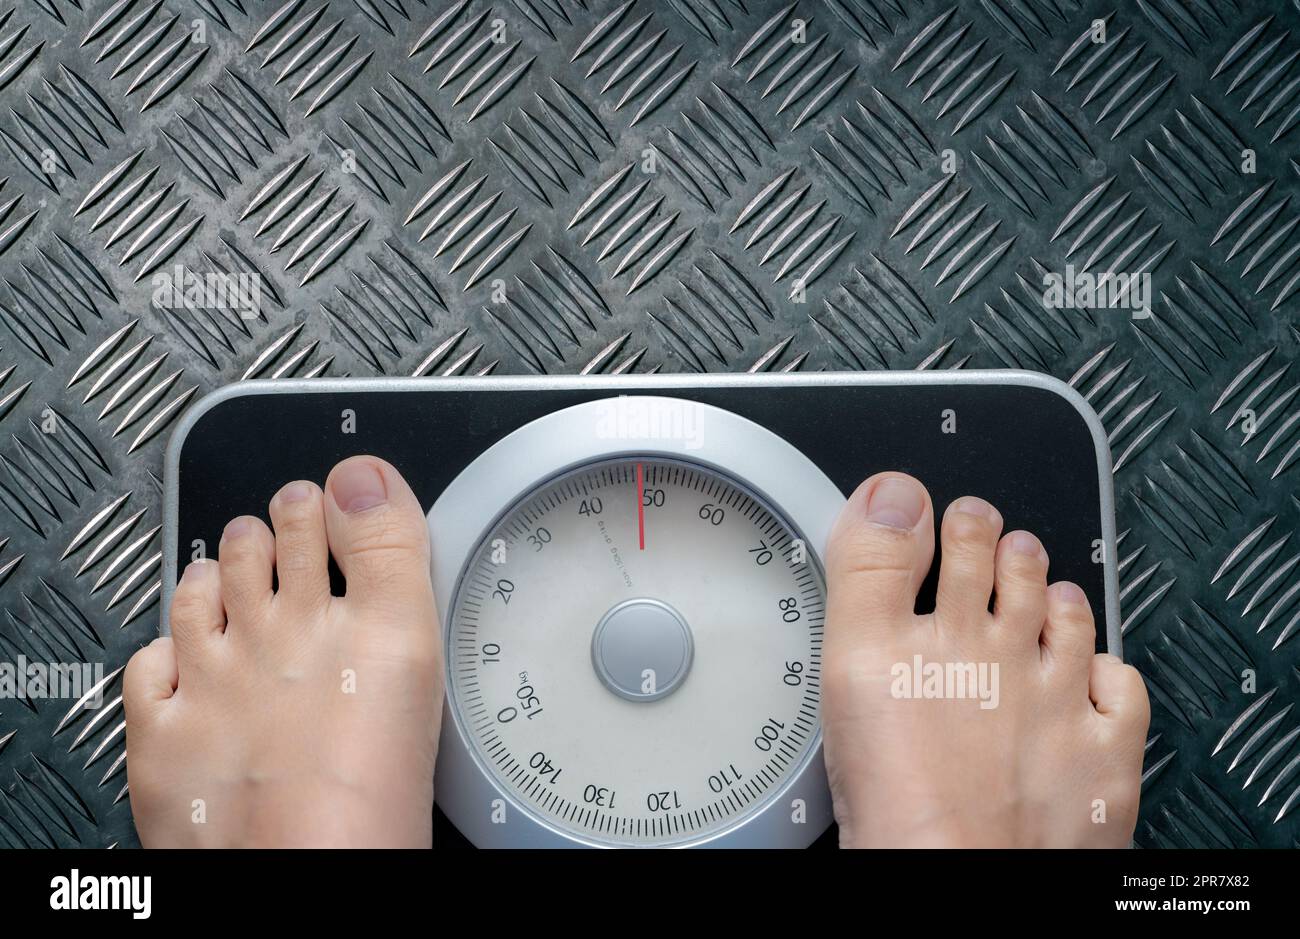 Lose Weight Concept With Person On A Scale Measuring Kilograms Stock Photo  - Download Image Now - iStock